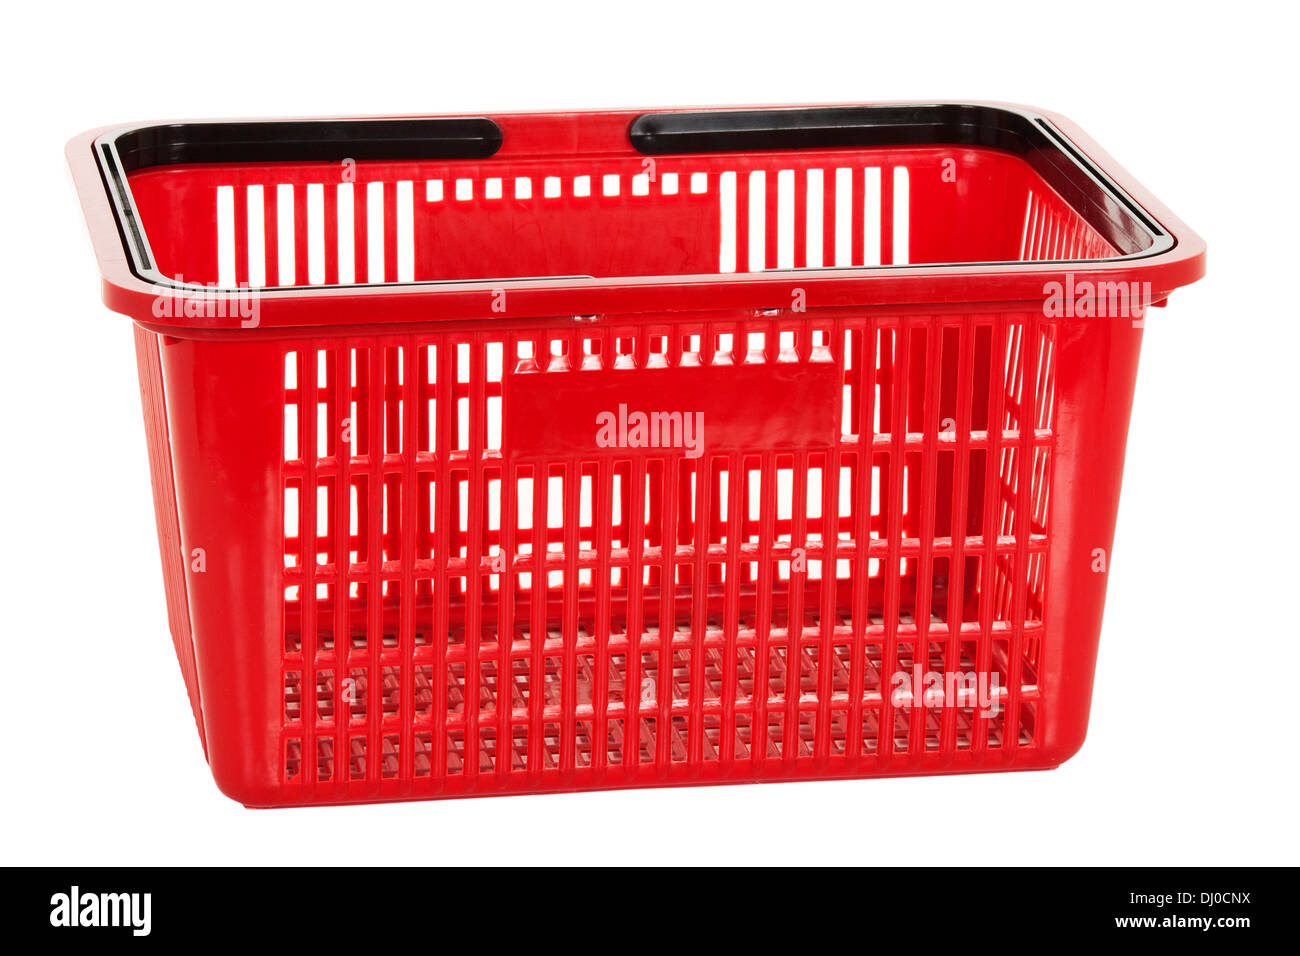 A red shopping basket on a white background Stock Photo